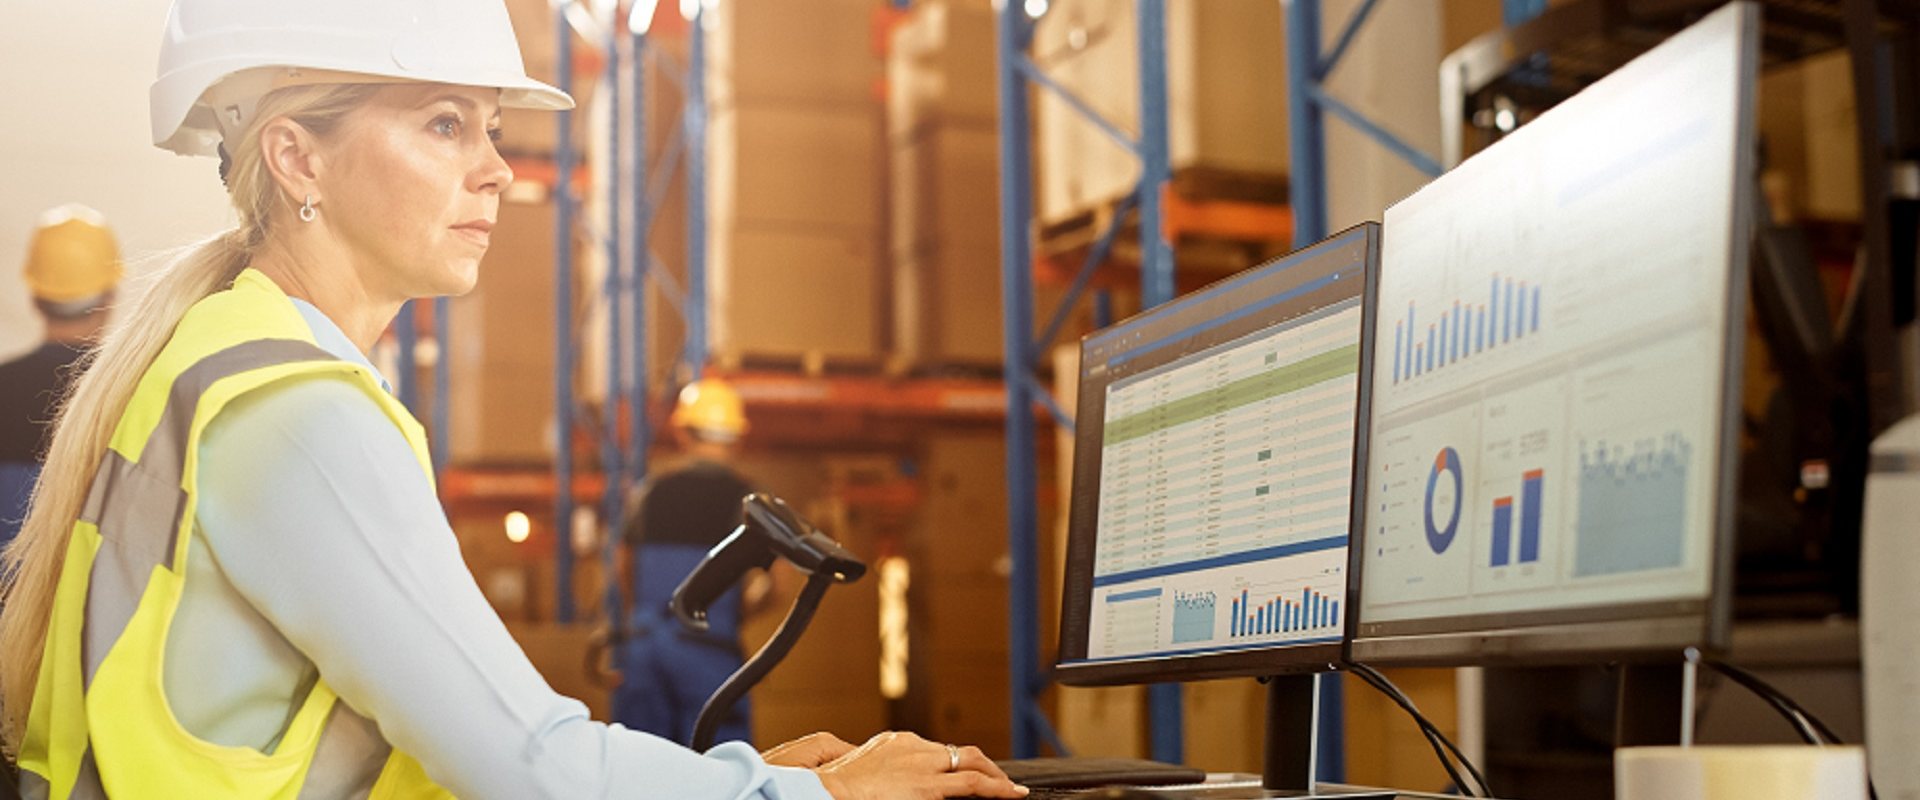 Optimize supply chain performance and efficiency